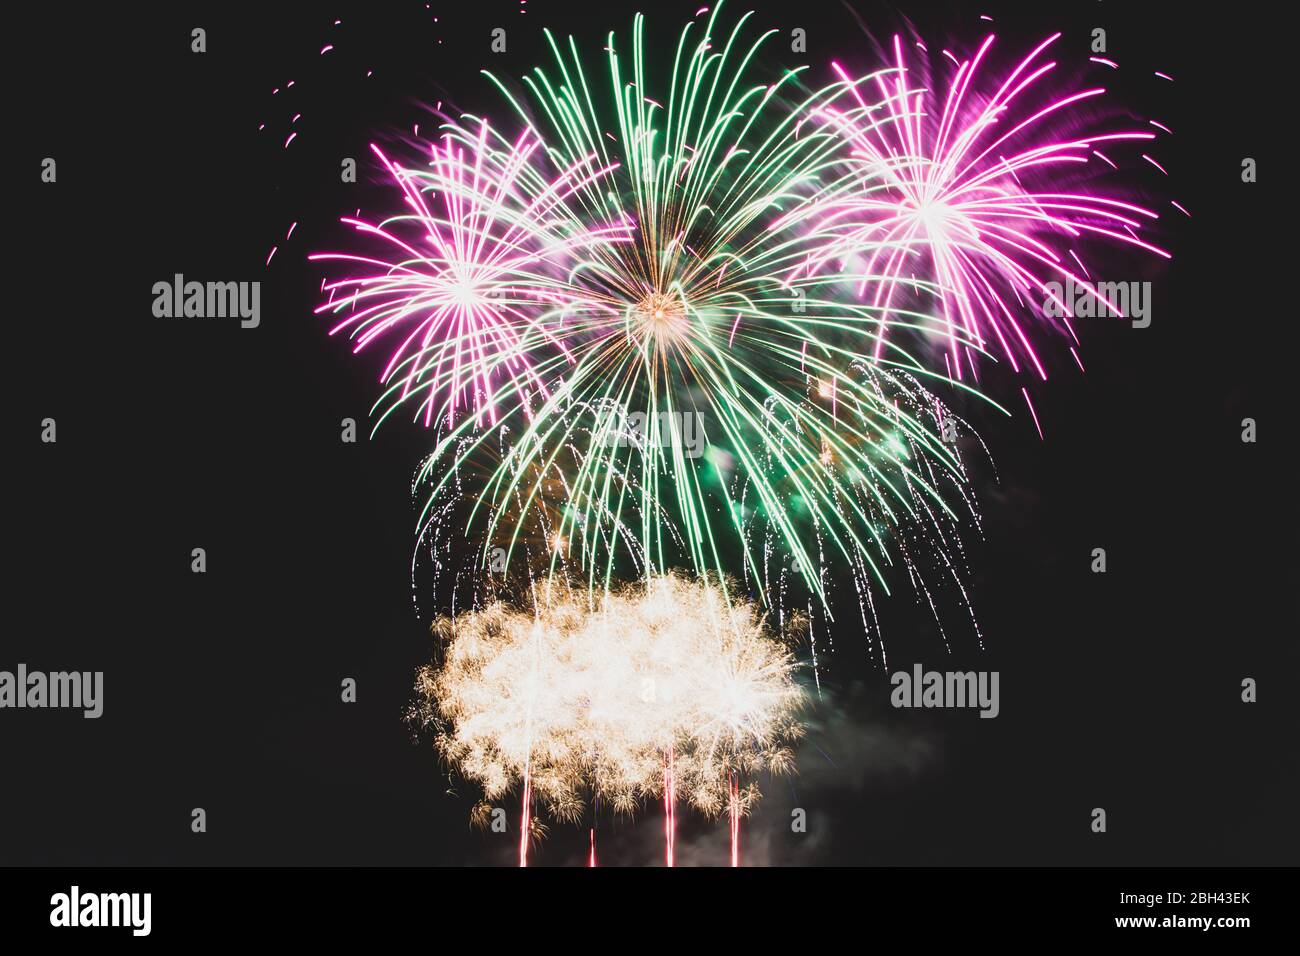 Green and purple fireworks mid explosion against a dark night sky Stock Photo